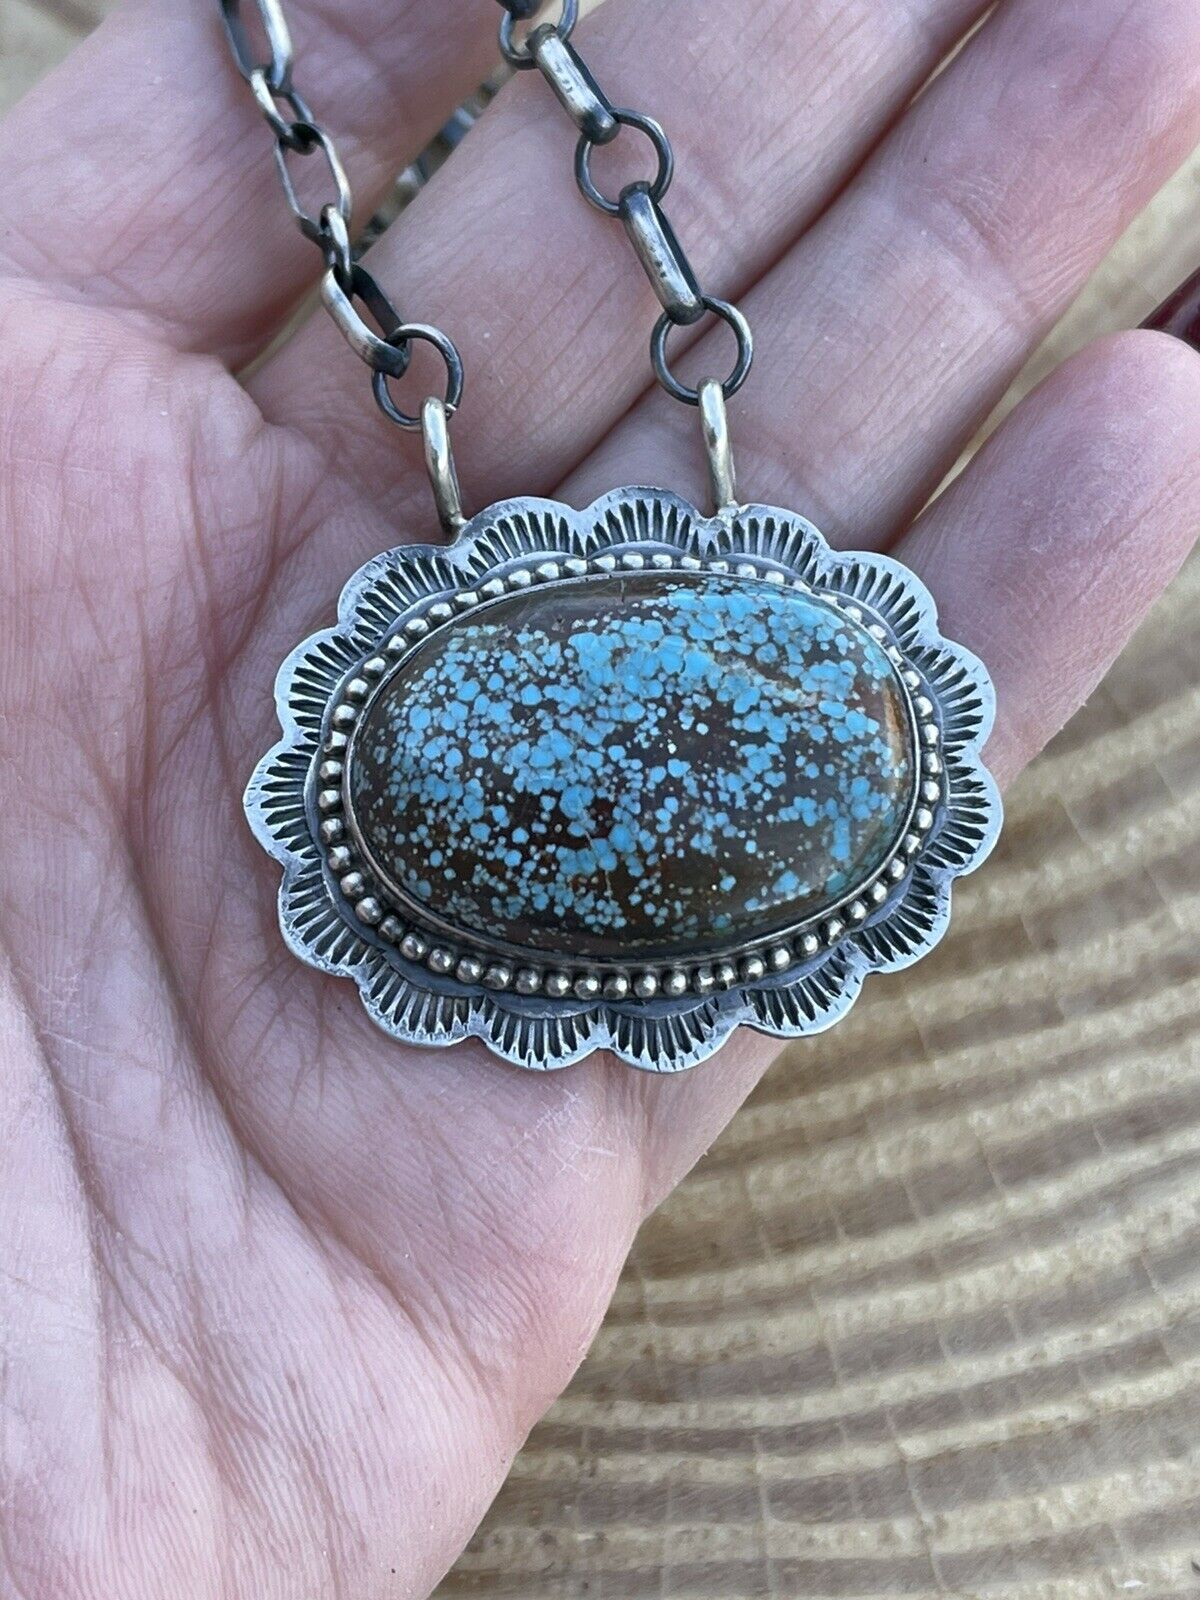 Navajo Kingman Web Turquoise Stone & Sterling Silver Necklace